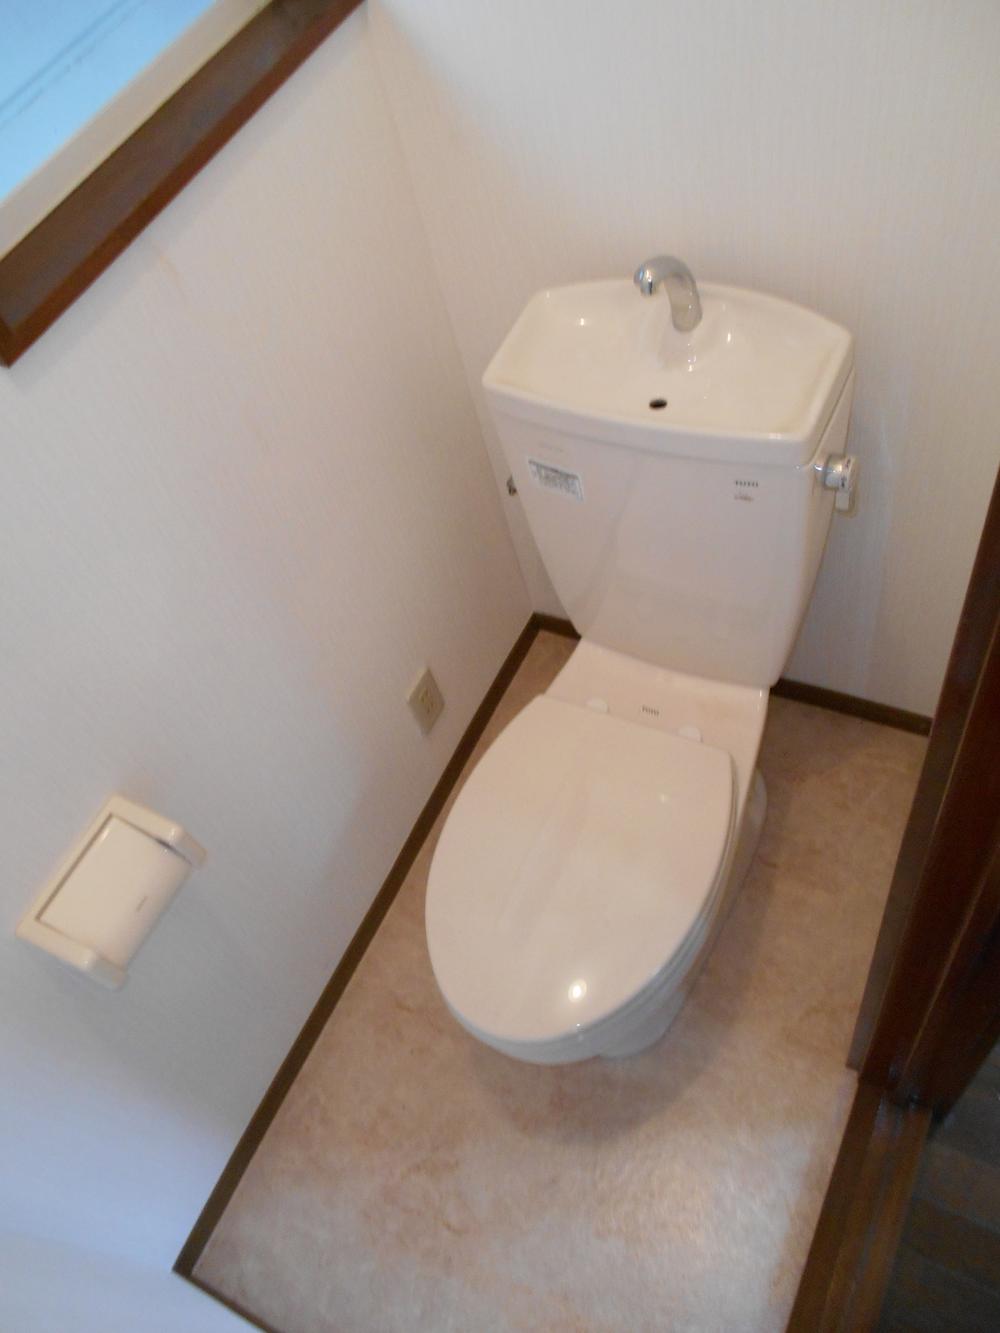 Toilet. It is a new article! 